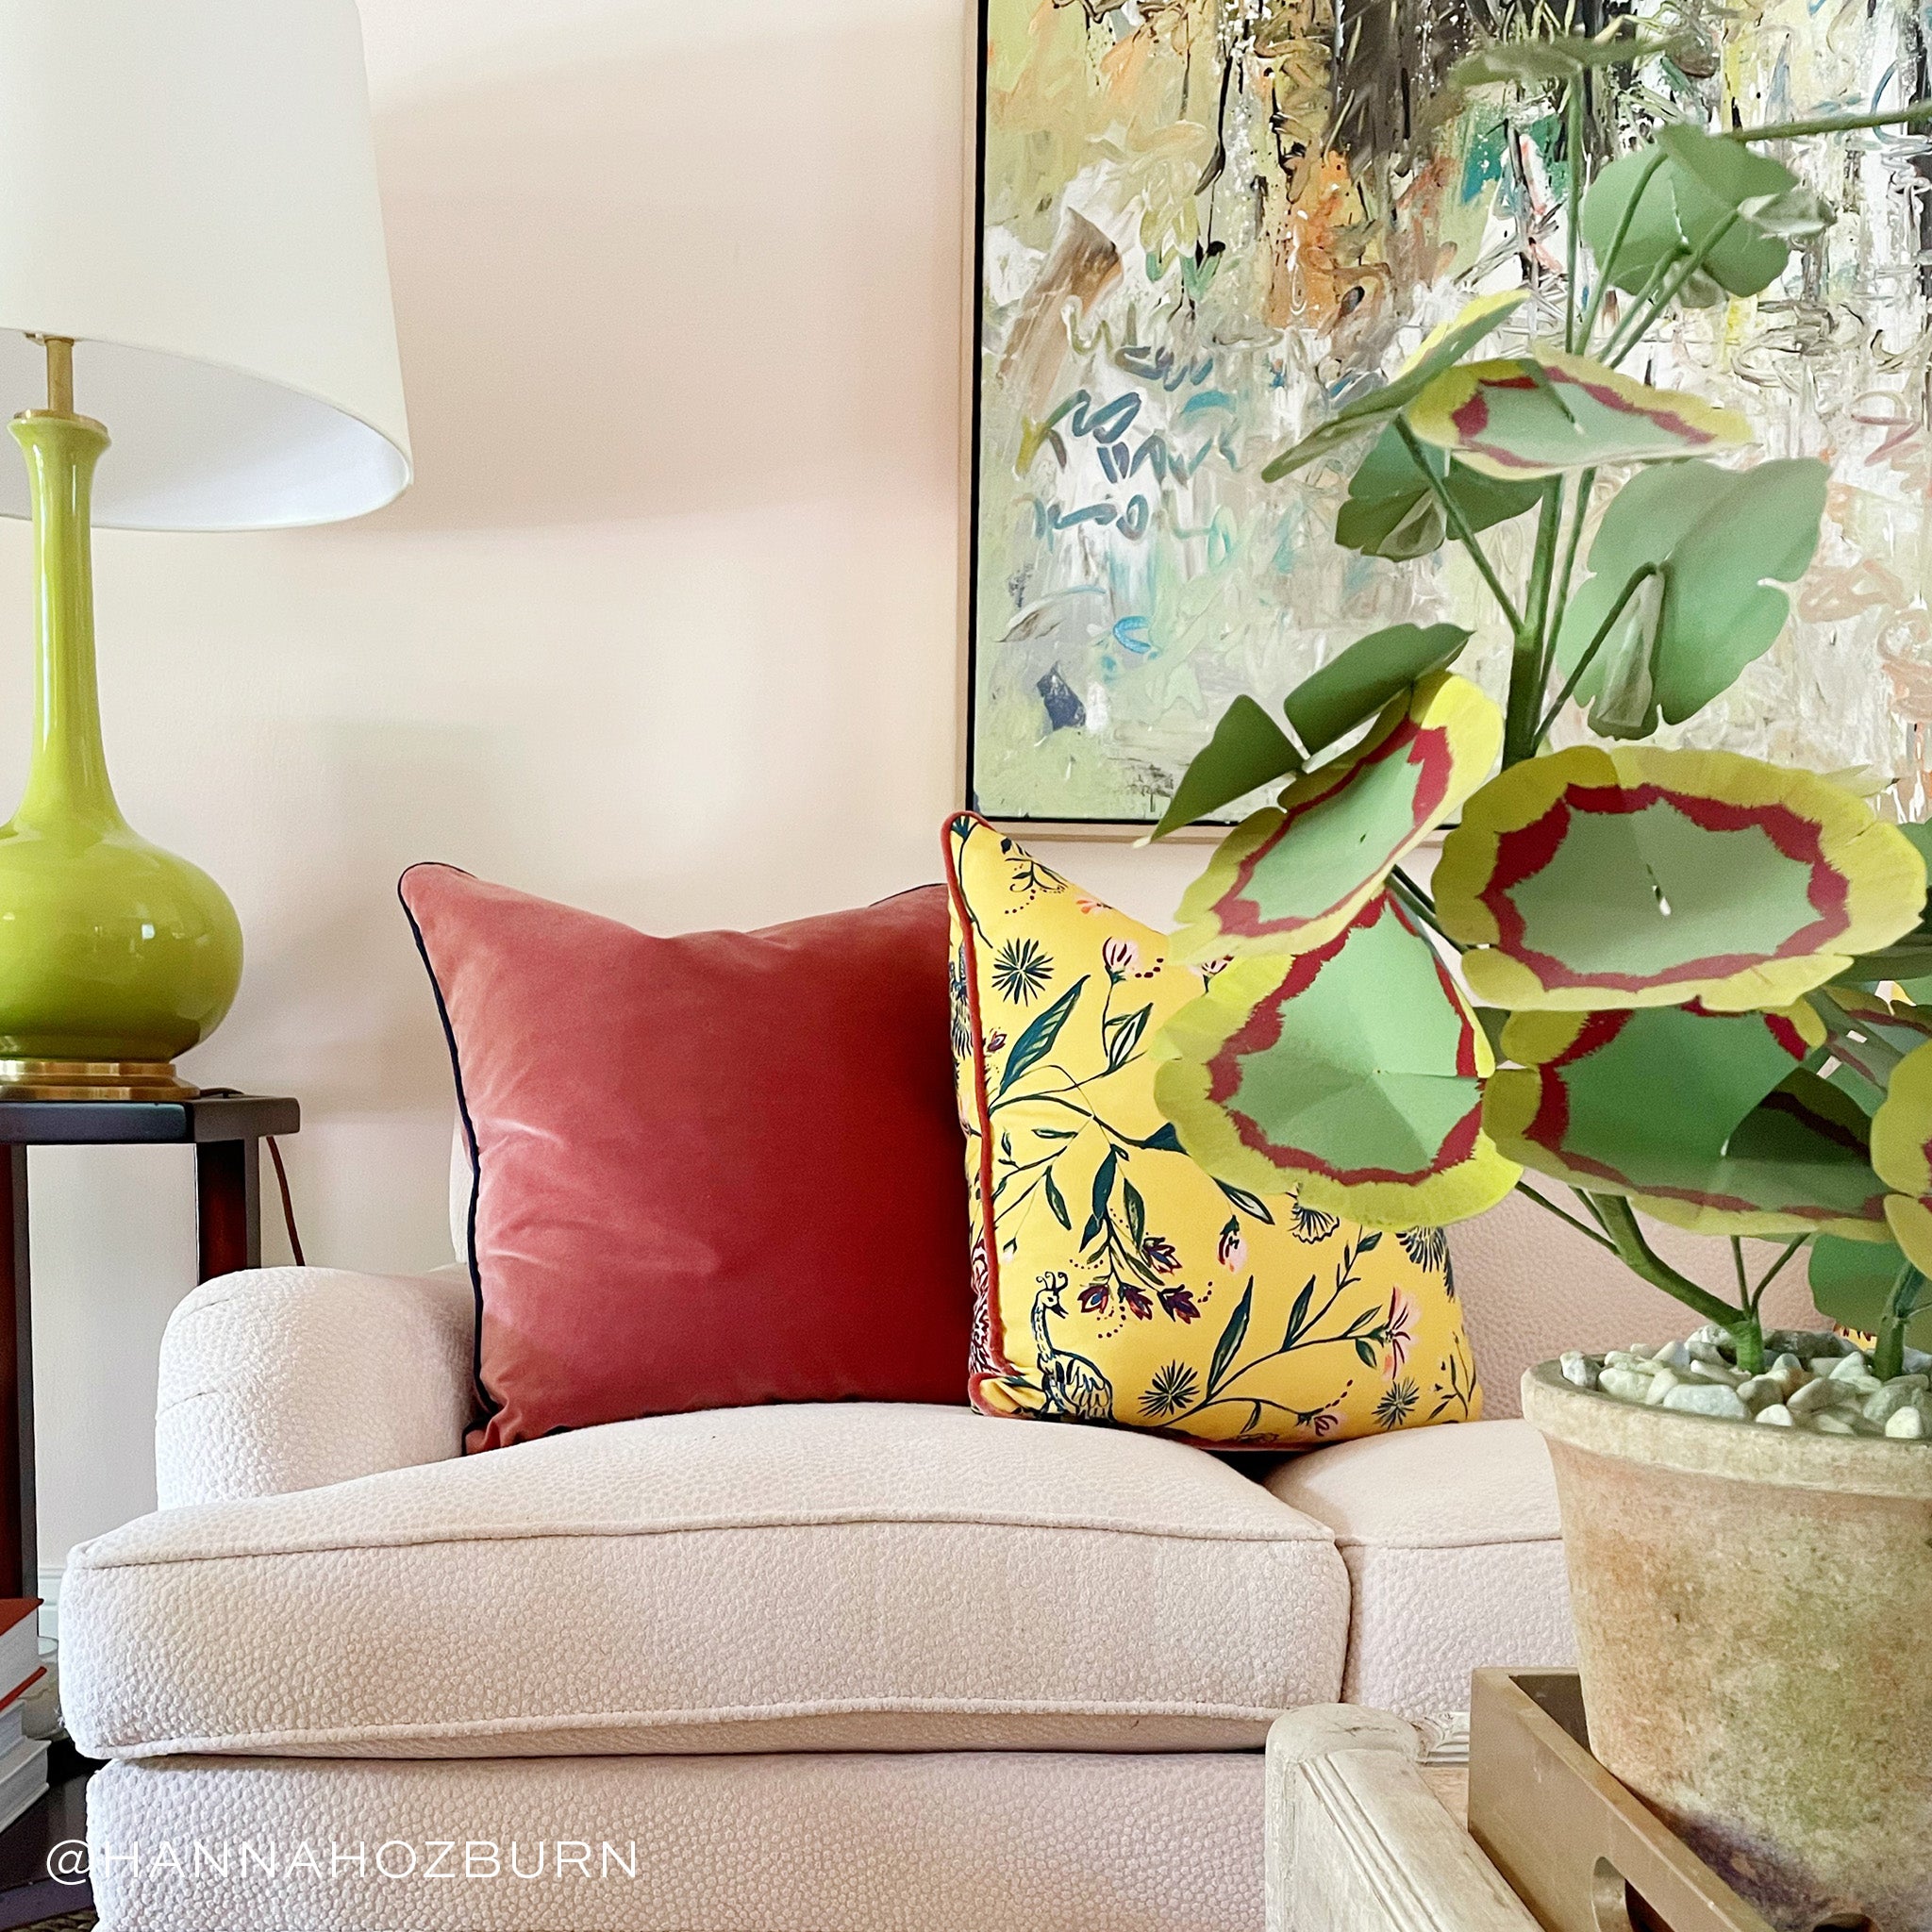 Coral Velvet and Yellow Chinoiserie custom pillows styled on white couch in a living room next to a green lamp and green and red plant. Photo taken by Hannah Ozburn.